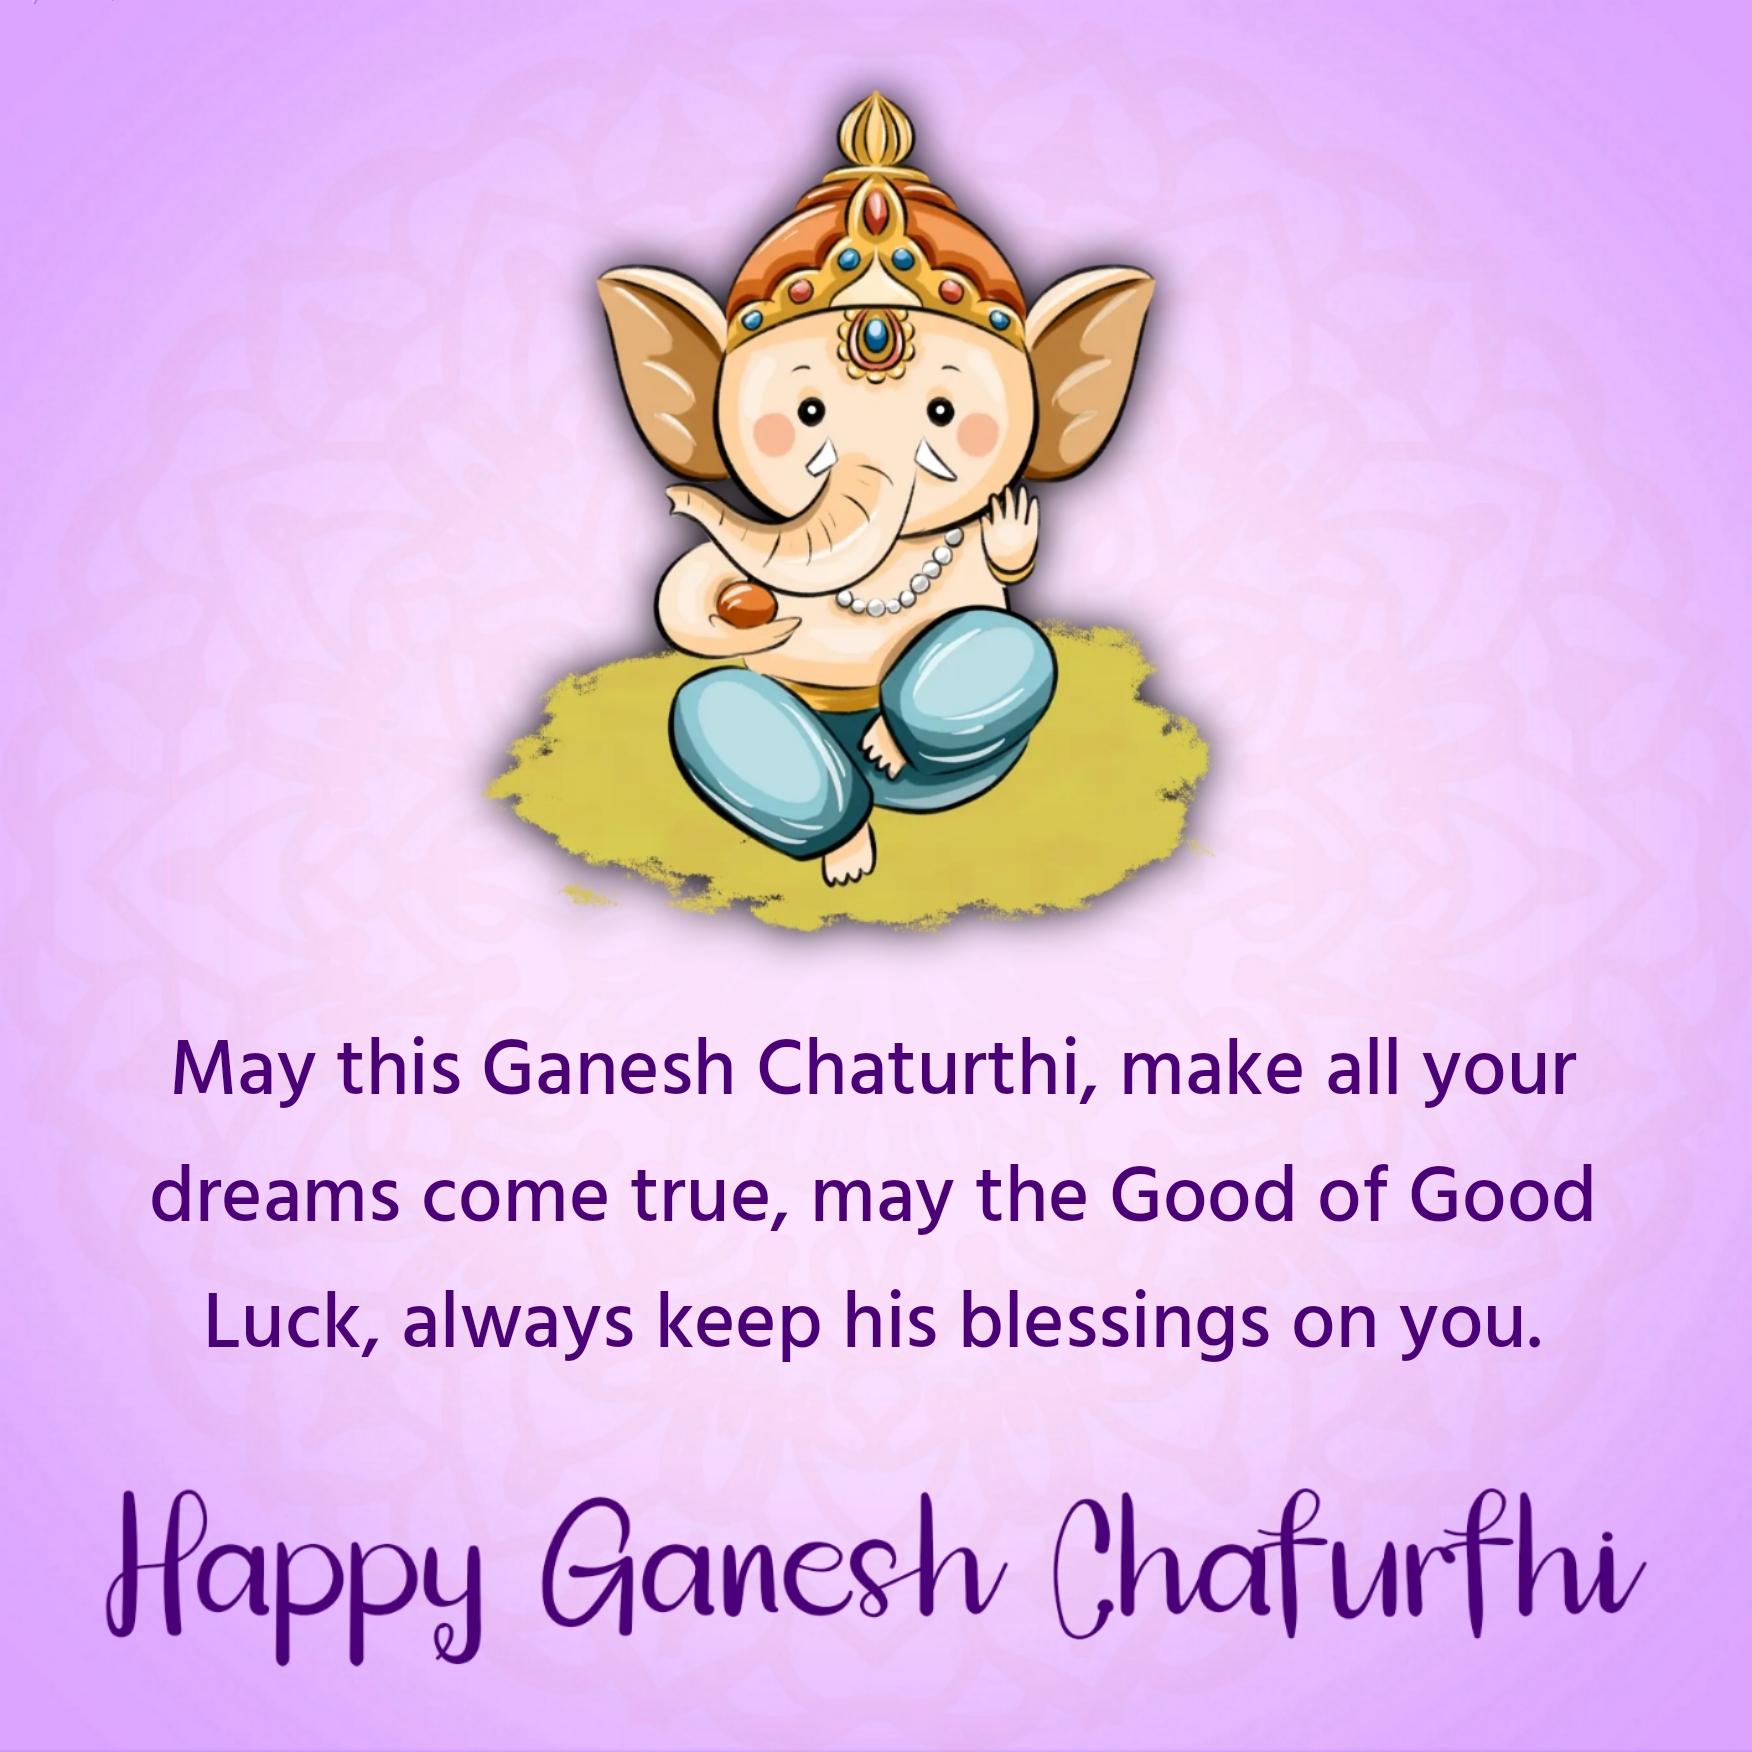 May this Ganesh Chaturthi make all your dreams come true